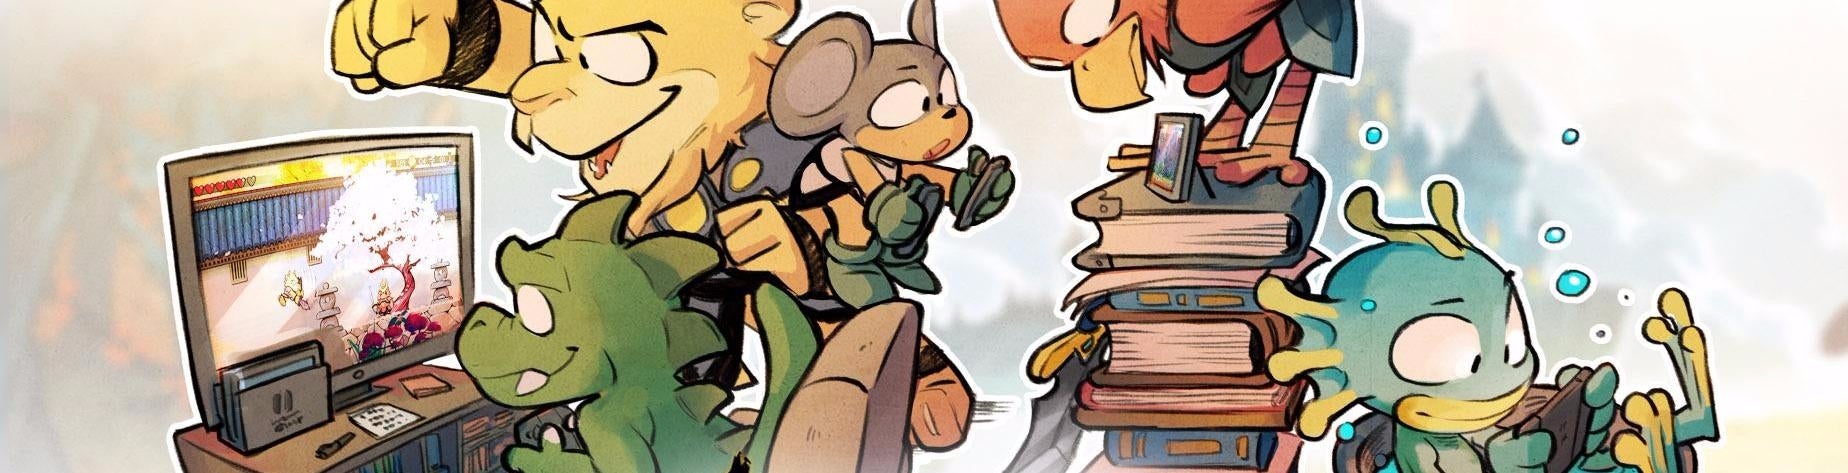 Image for Wonder Boy: The Dragon's Trap review